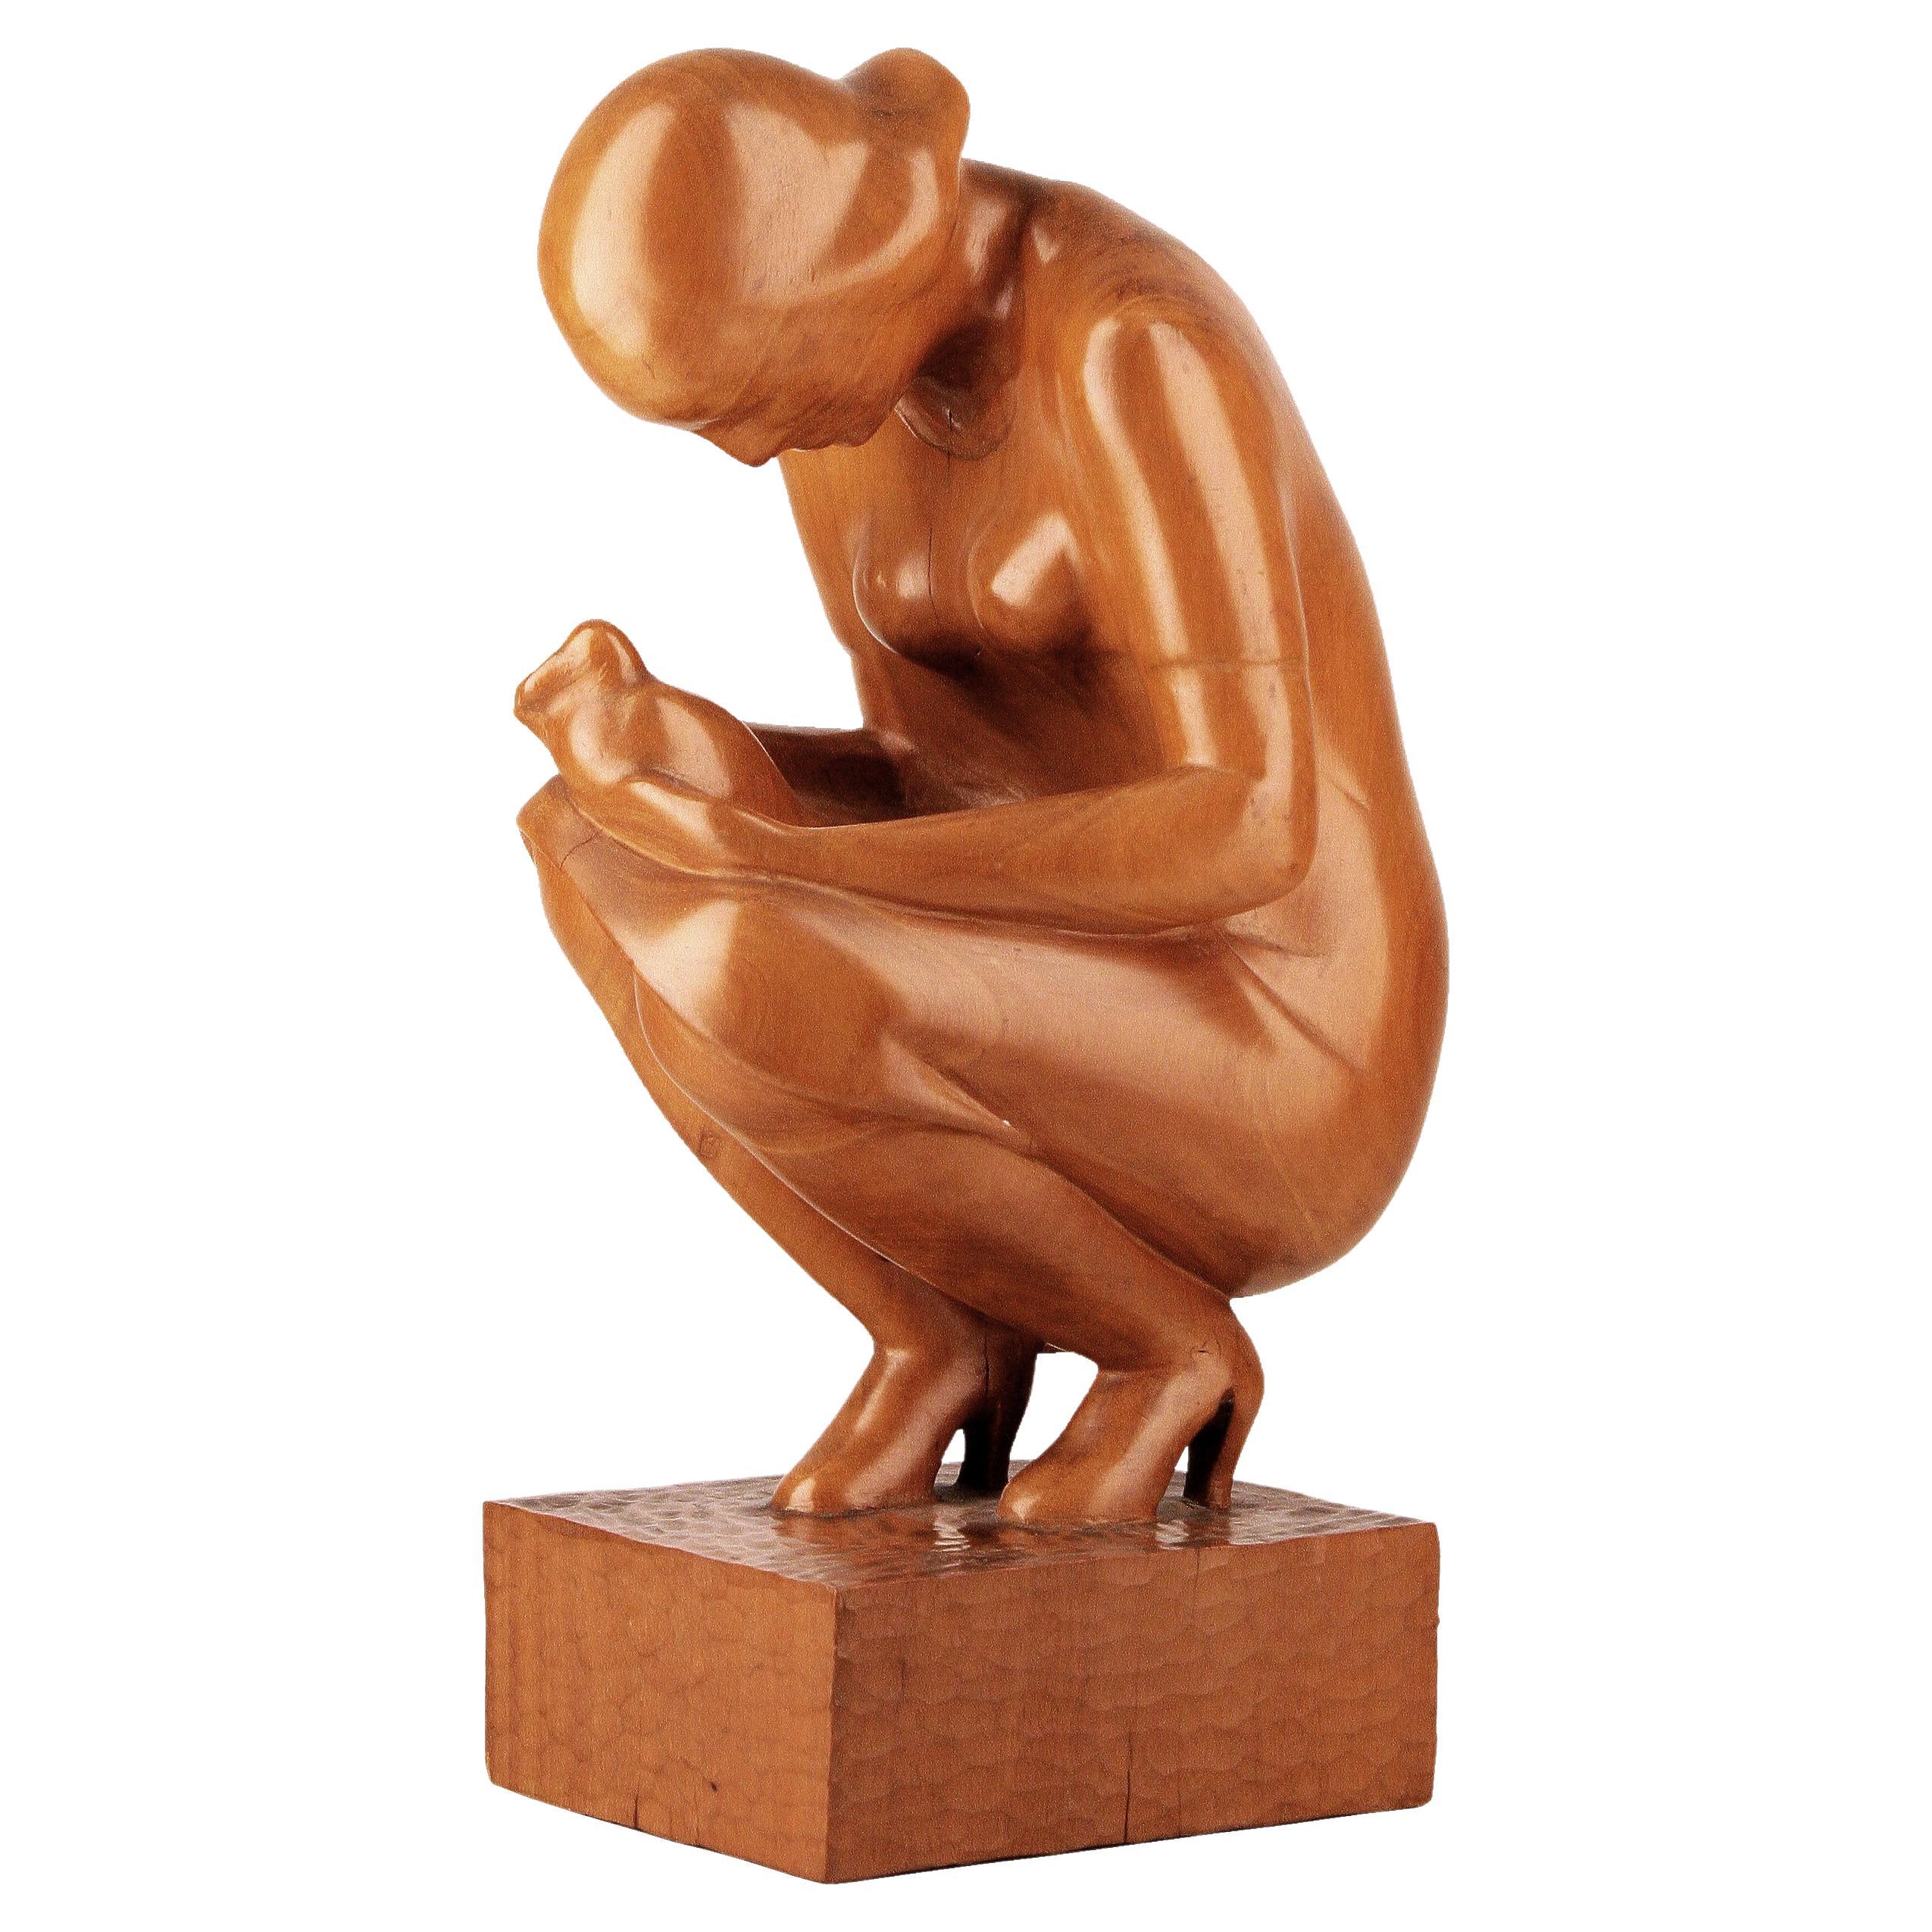 Mid-20th Century Varnished Wood Sculpture of Crouched Lady by Godofredo Paino